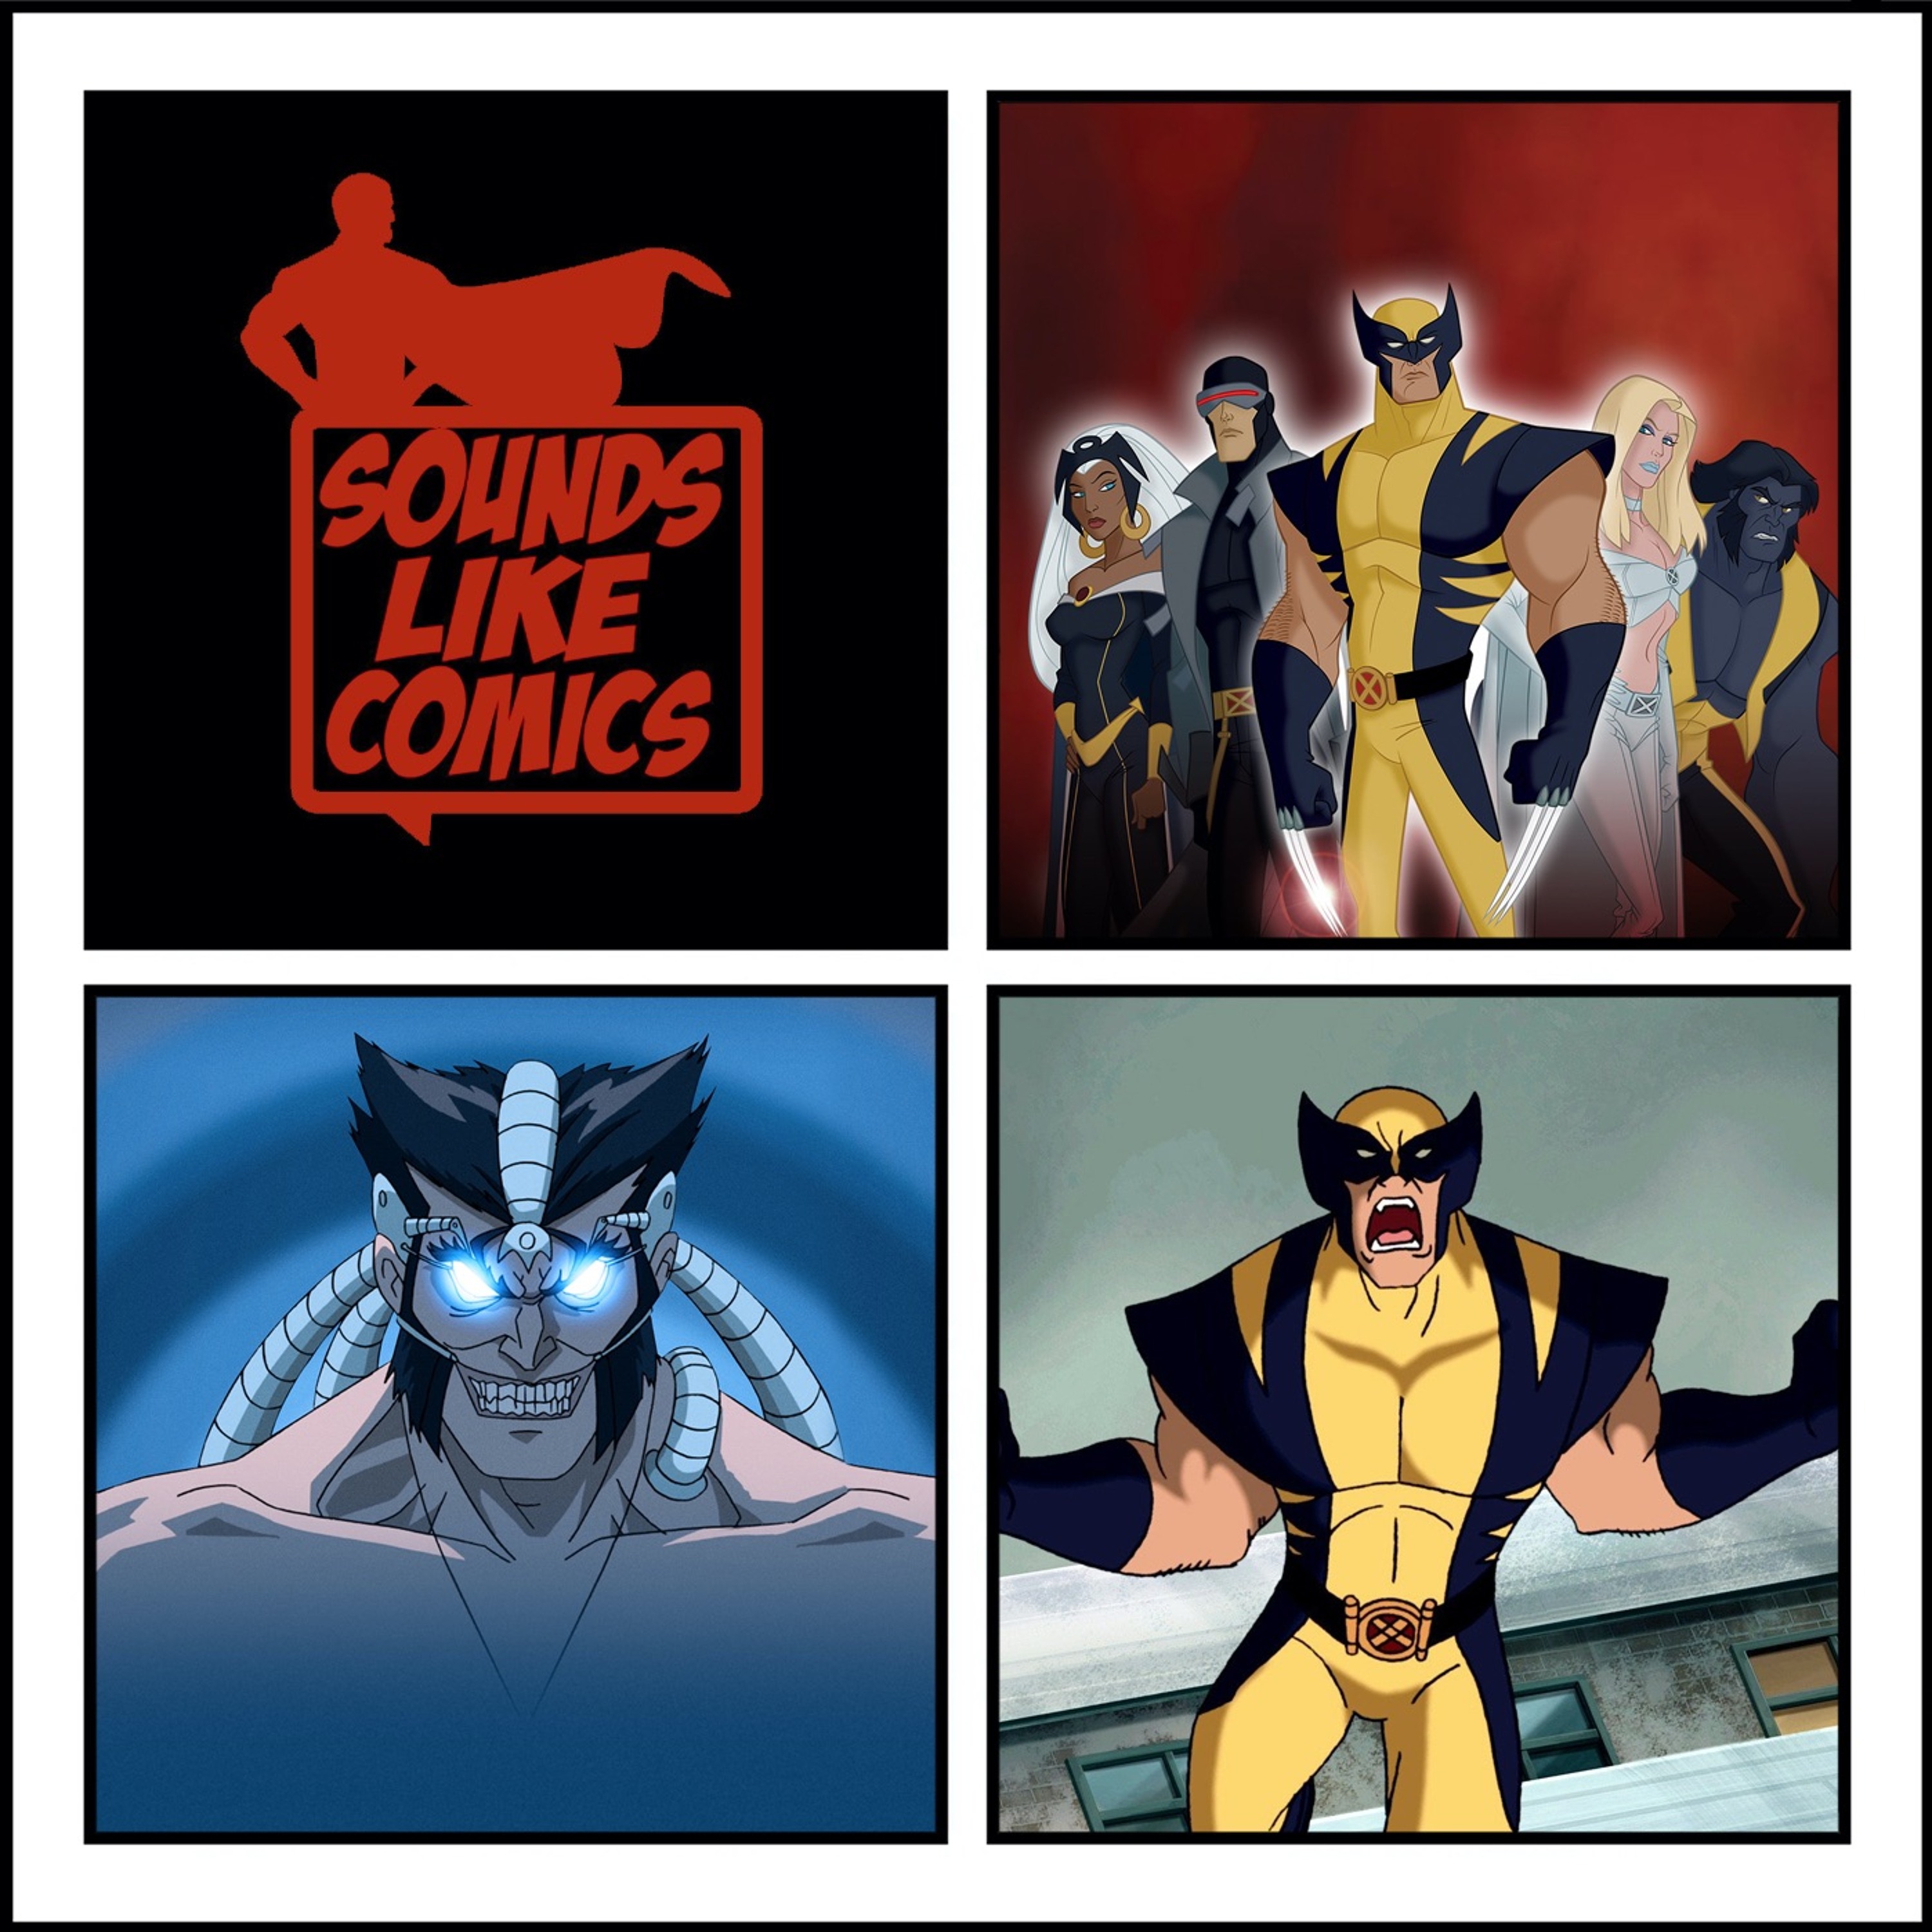 Sounds Like Comics Ep 244 - Wolverine and the X-Men (TV Series 2008 - 2009)